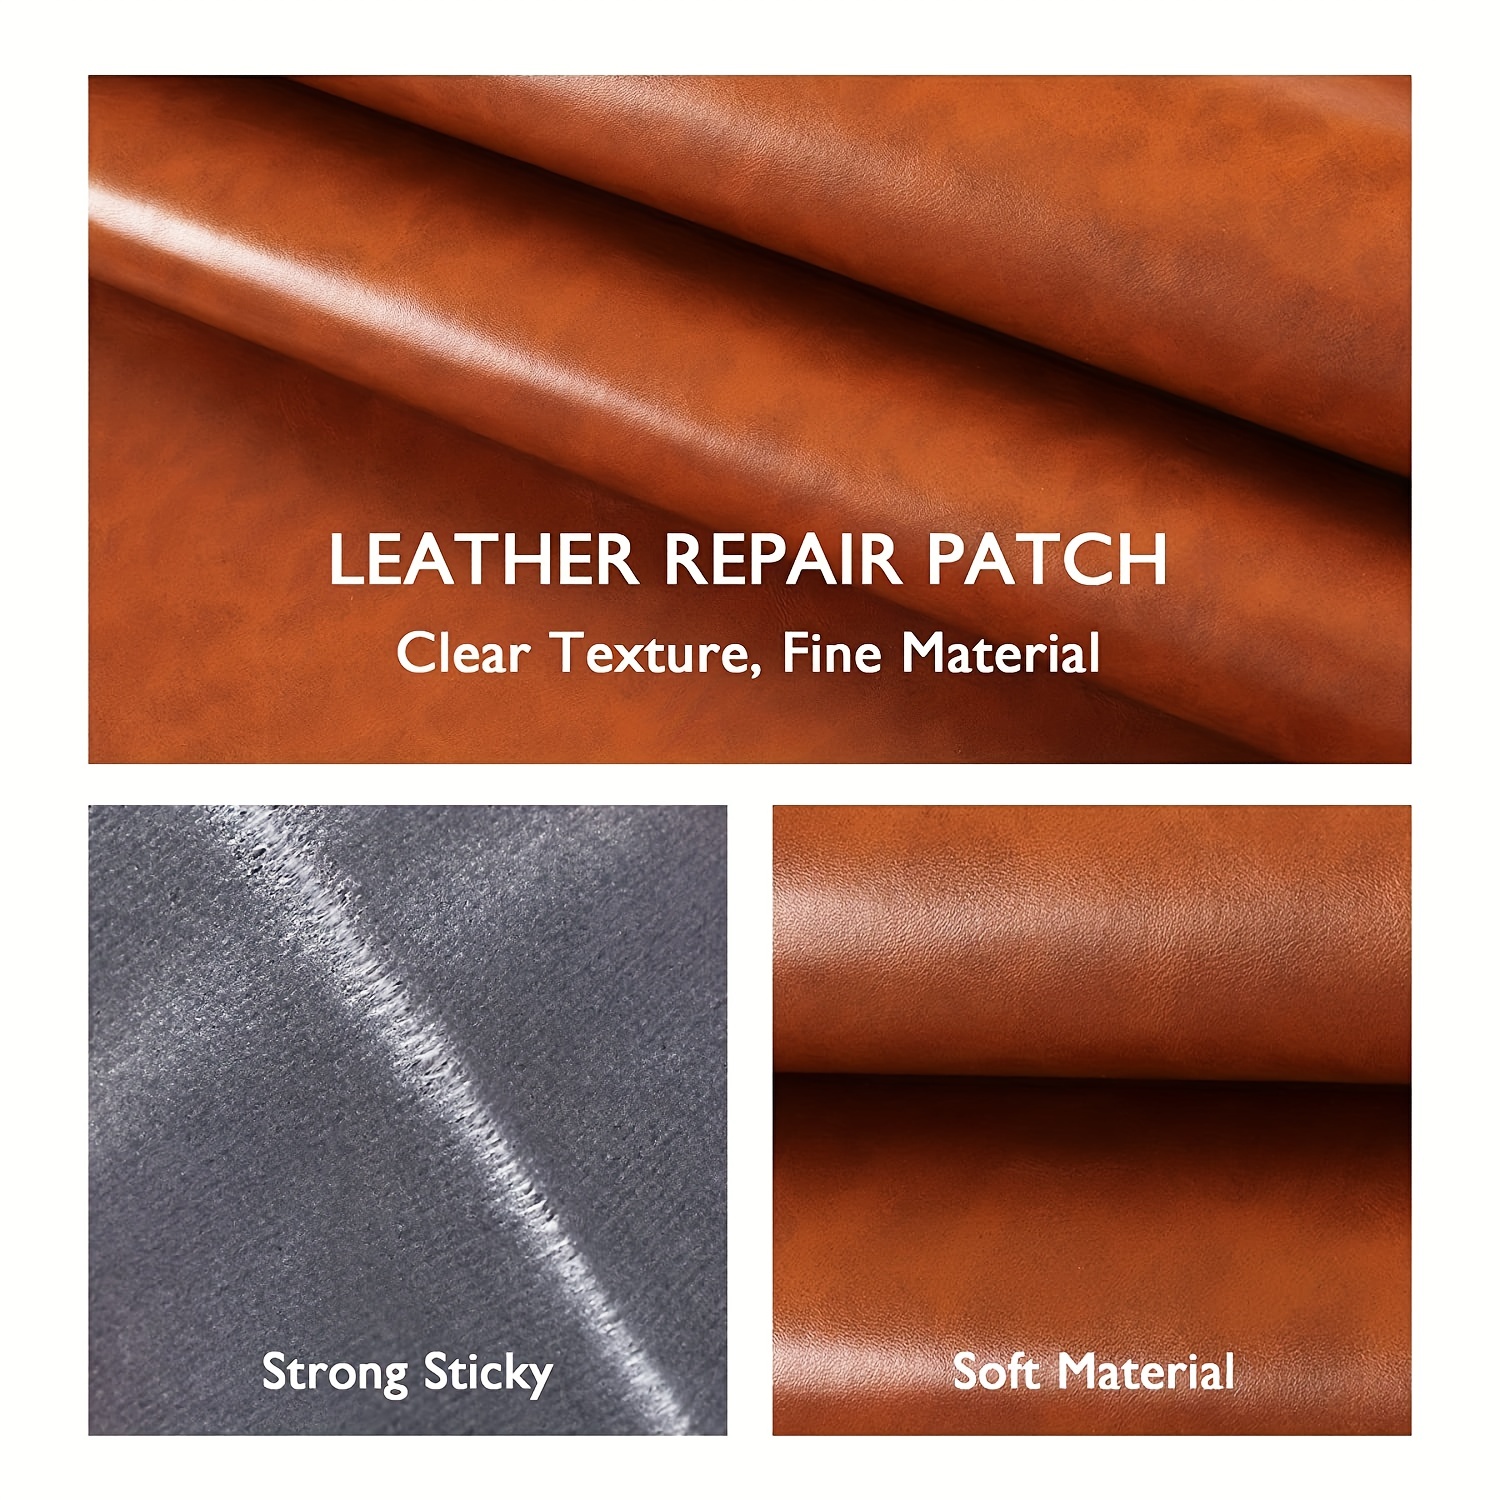 Leather Tape Repair Patch Self Adhesive Sticker Patch, Faux